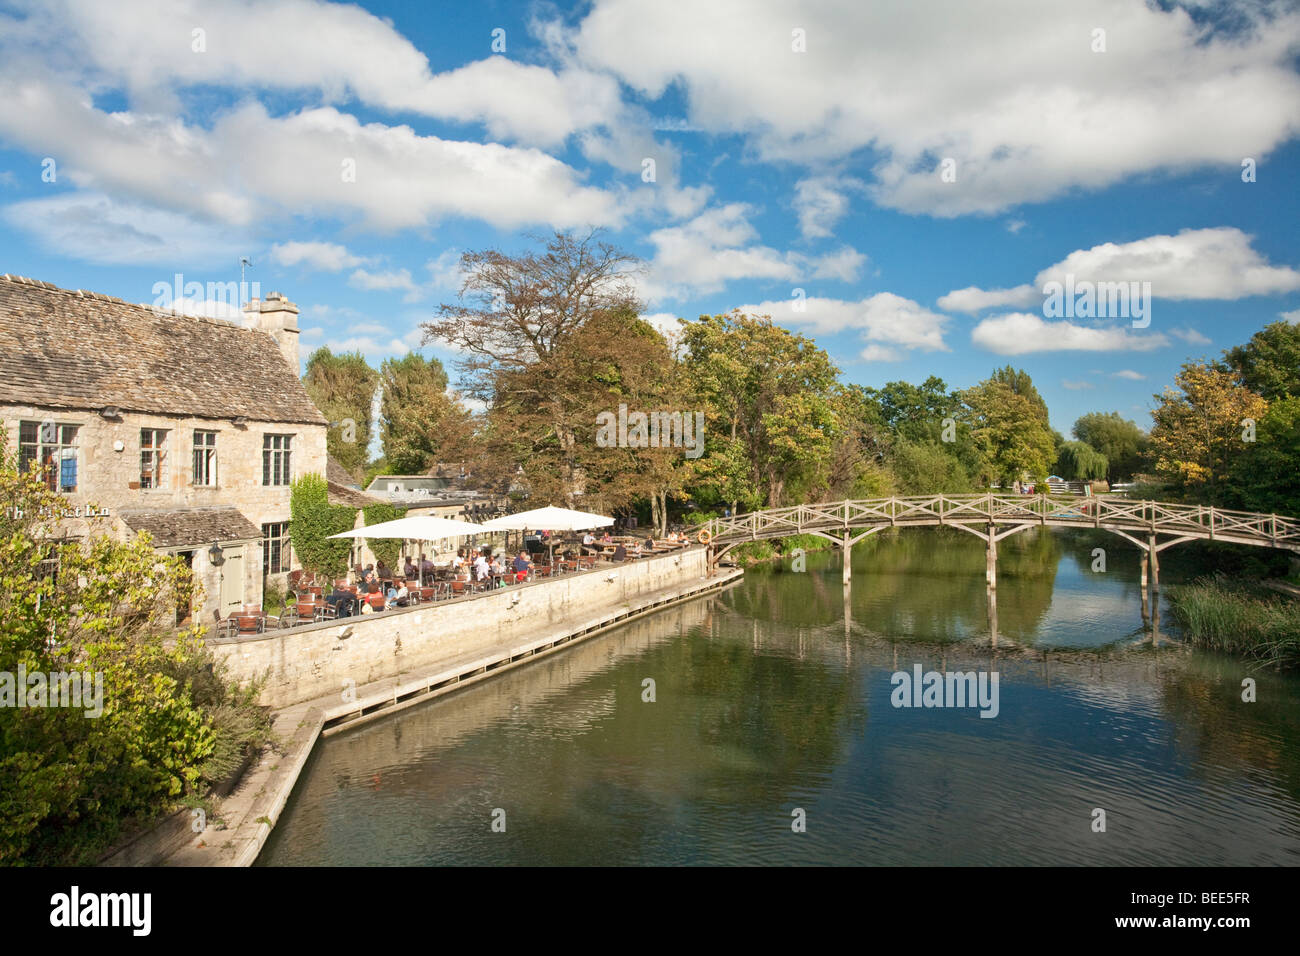 The Trout Inn on the banks of the River Thames in Upper Wolvercote, Oxford, Uk Stock Photo